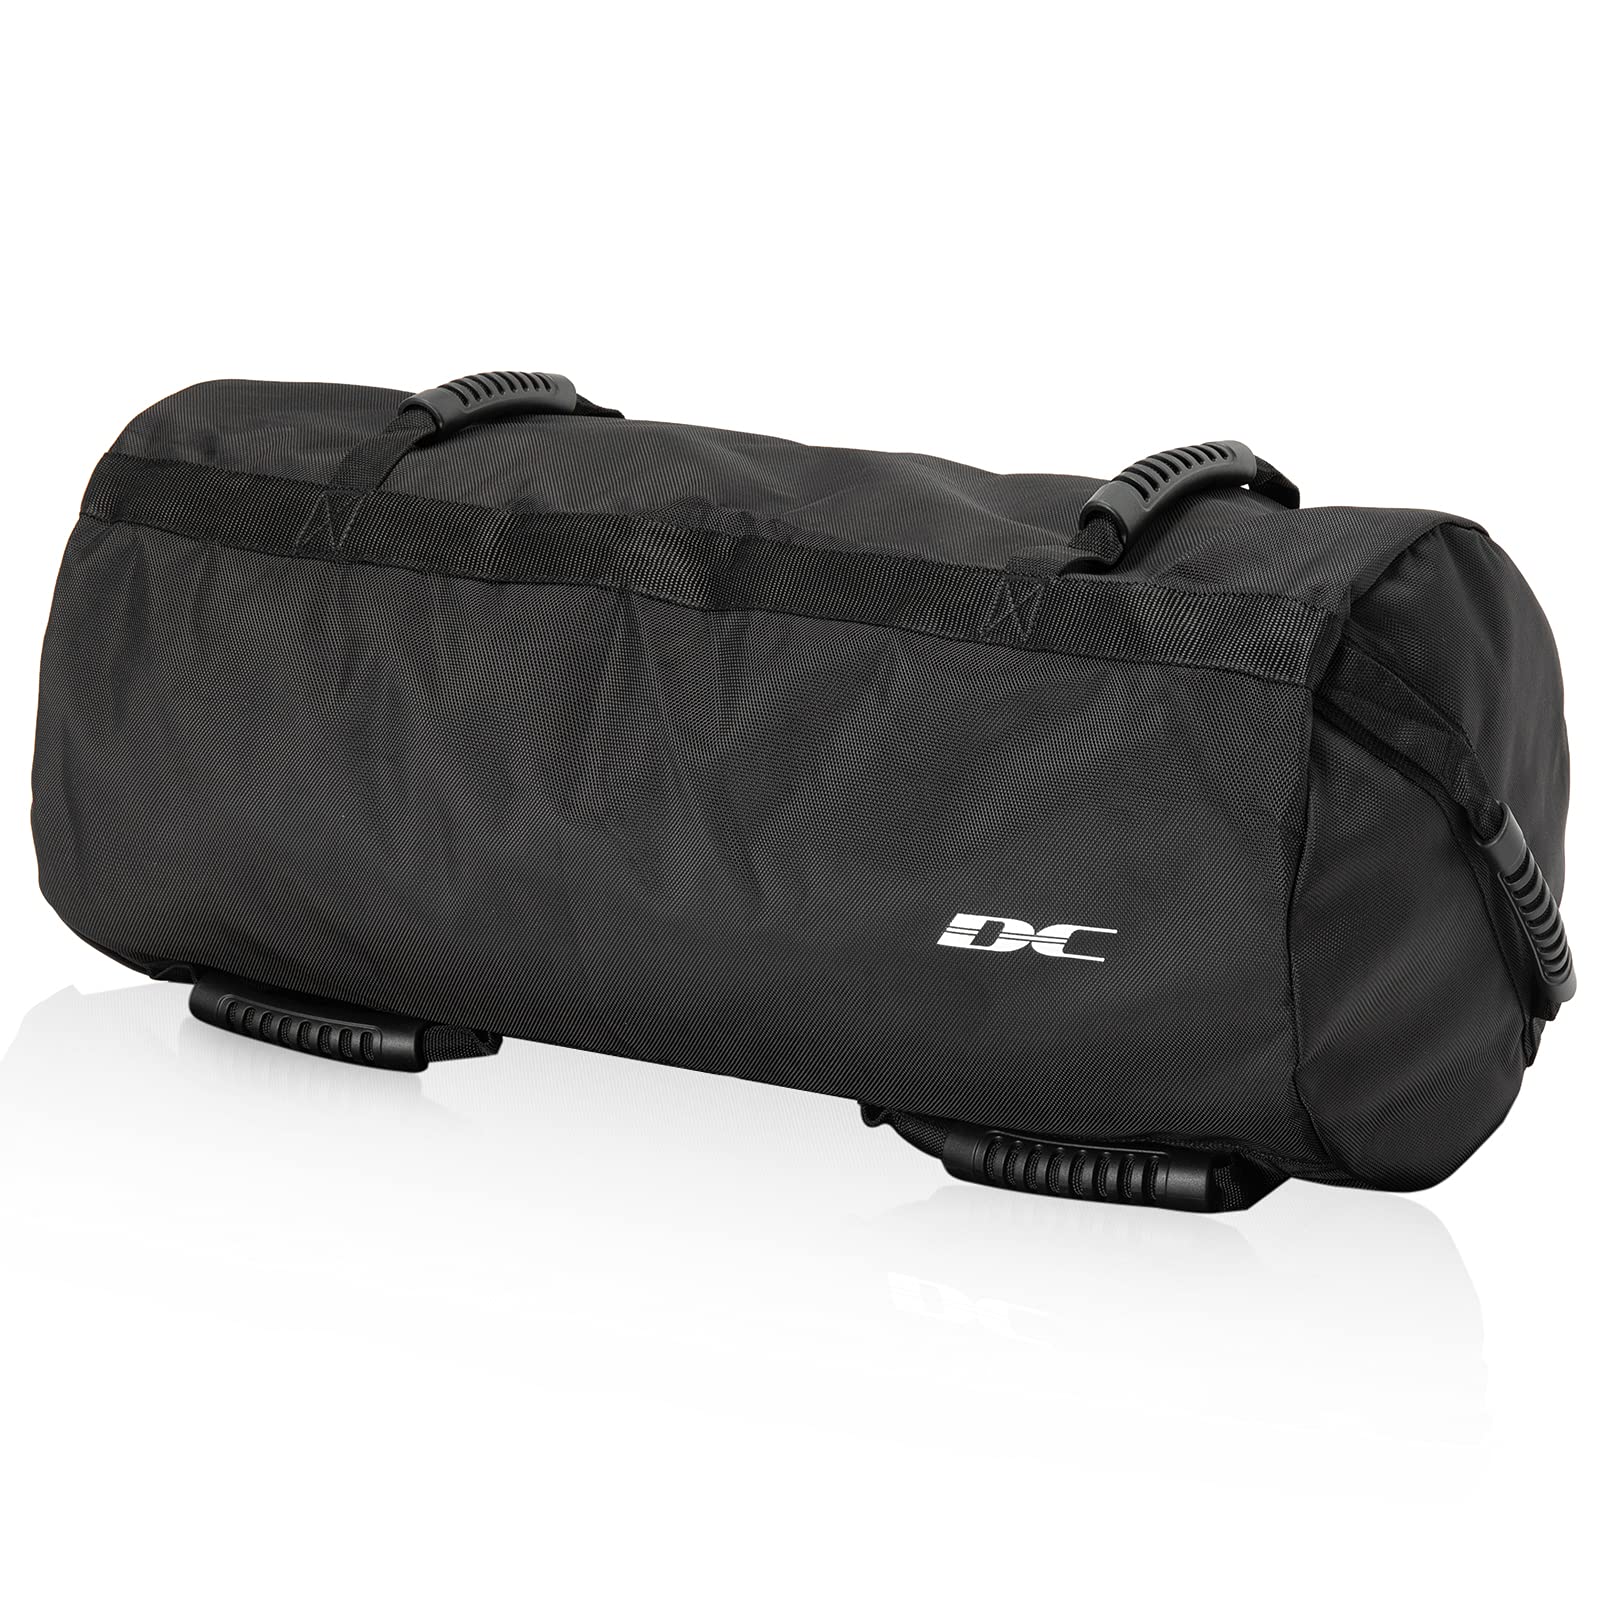 Heavy Duty Sandbag - Workout Bag with Handles for Weight Training